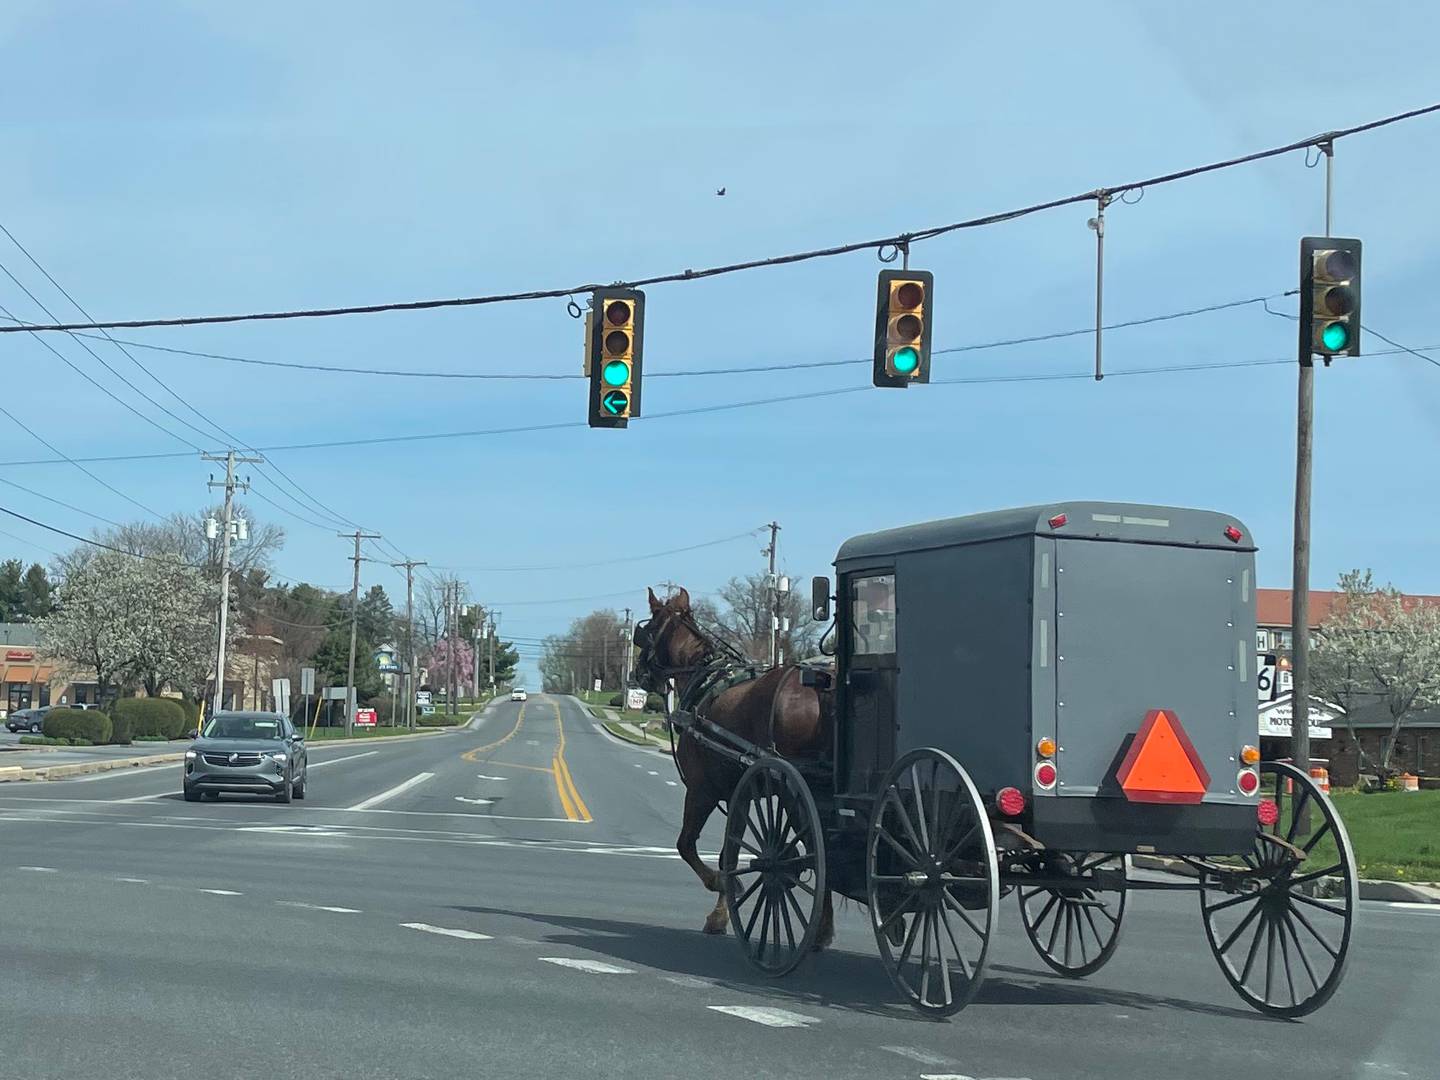 Expect to share the roads in Lancaster County with horse-drawn buggies, the main form of transportation for the estimated 40,000 Amish residents.